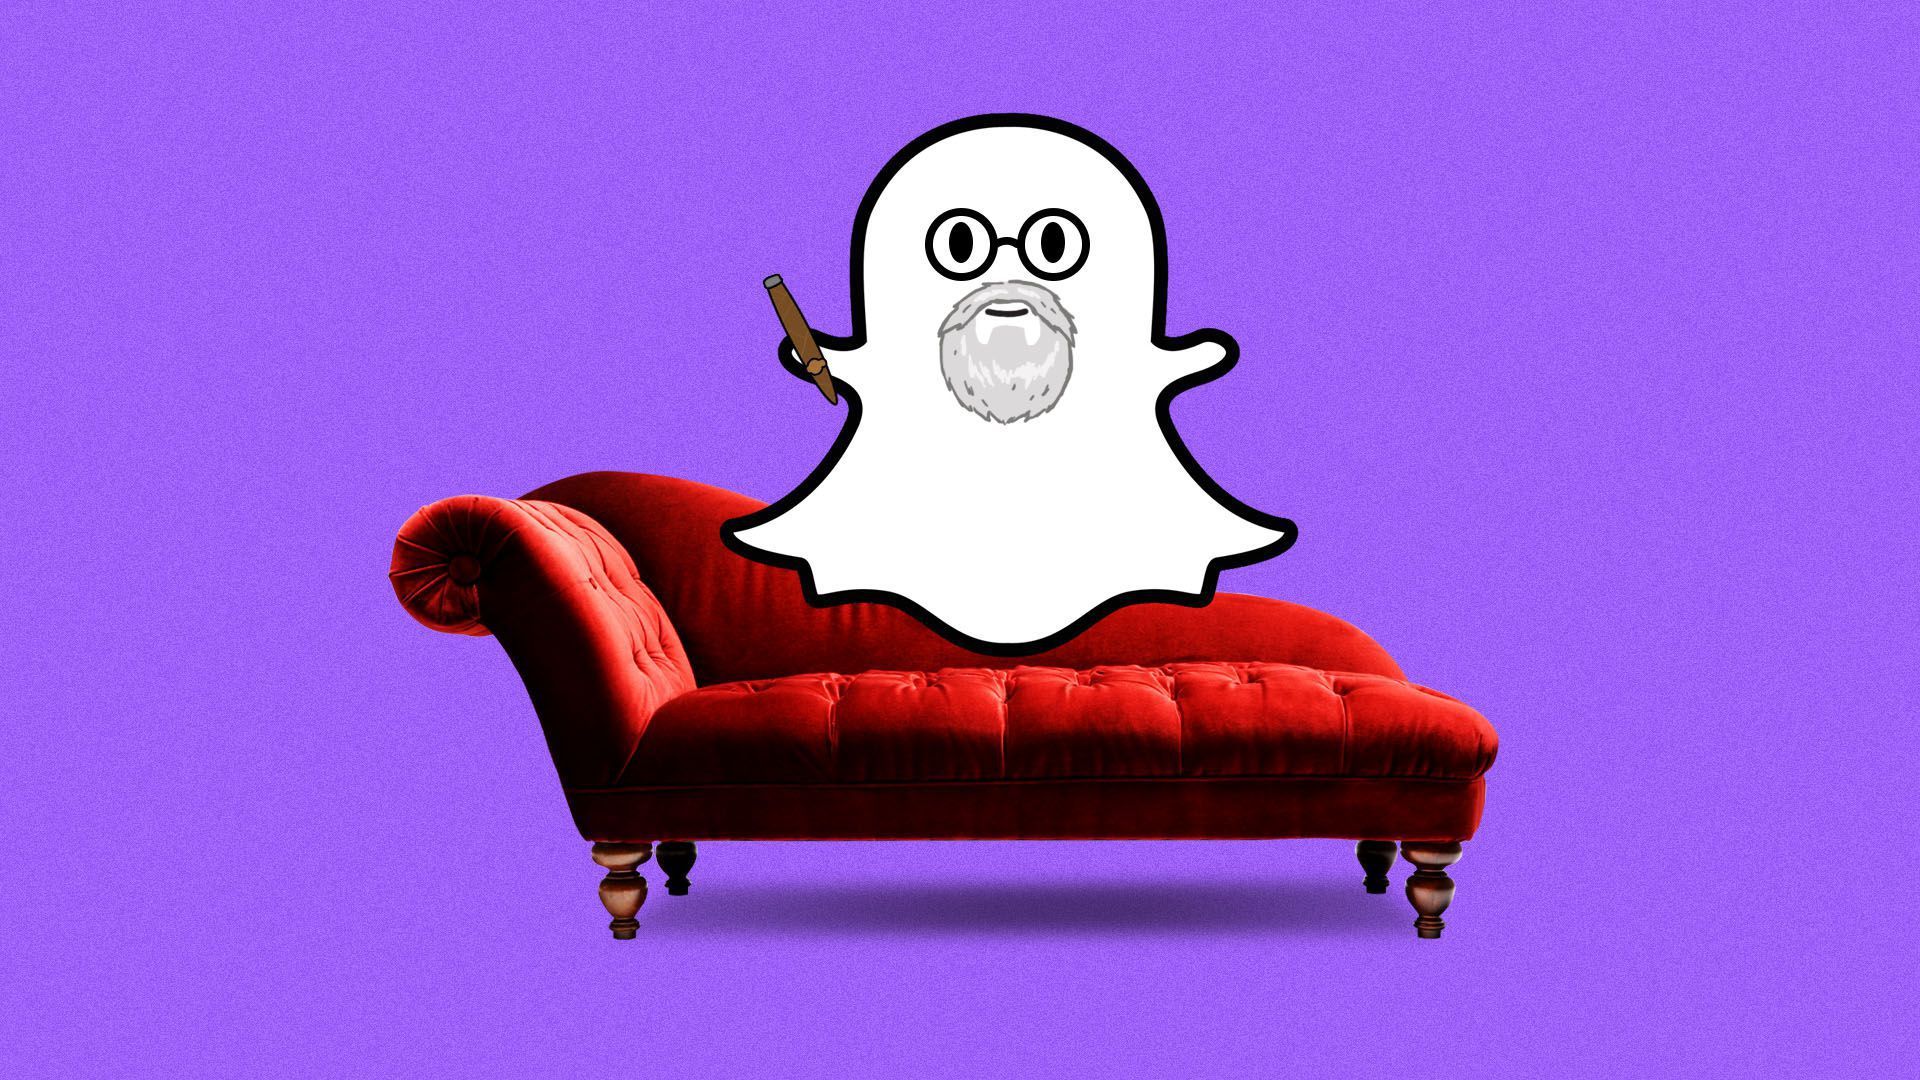 An illustration of Snapchat's ghost mascot with a white beard on a therapists' couch